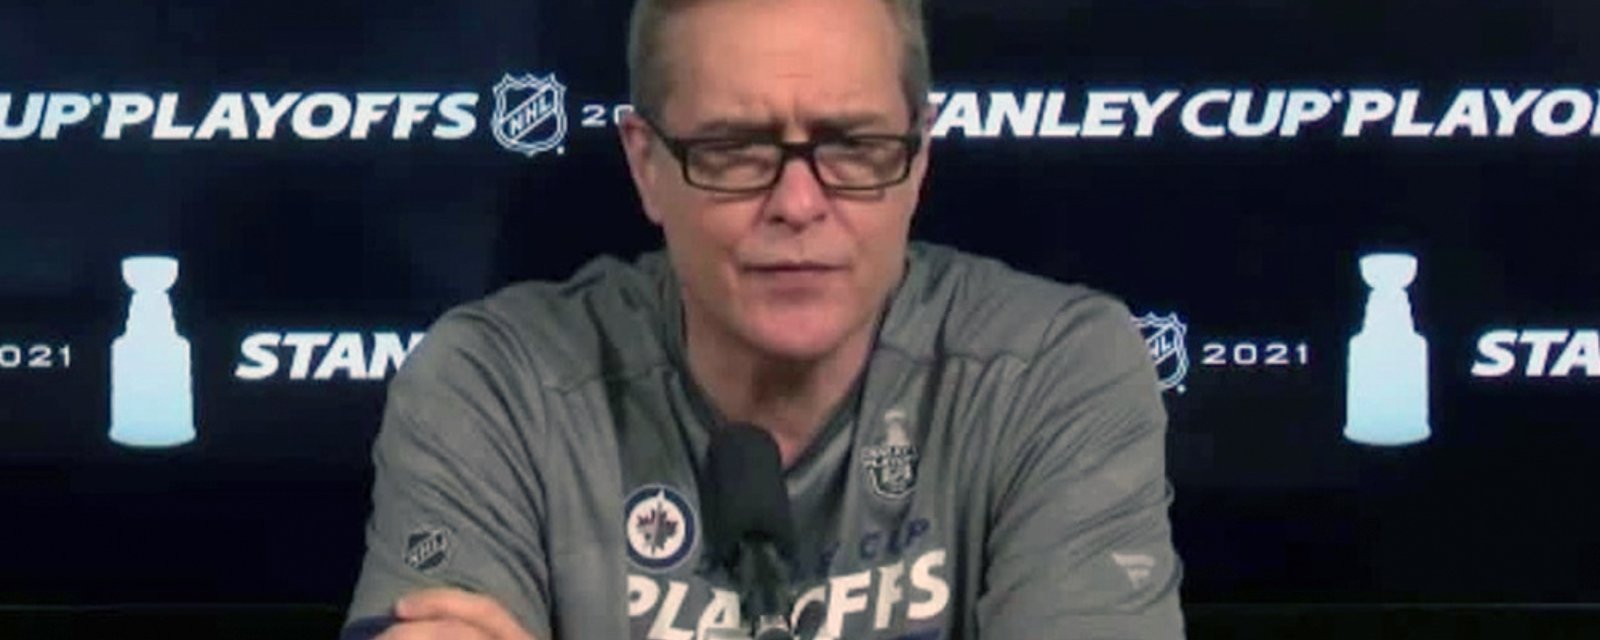 Paul Maurice defends Scheifele, calls play on Evans a “heavy hit for sure, but it was clean.”